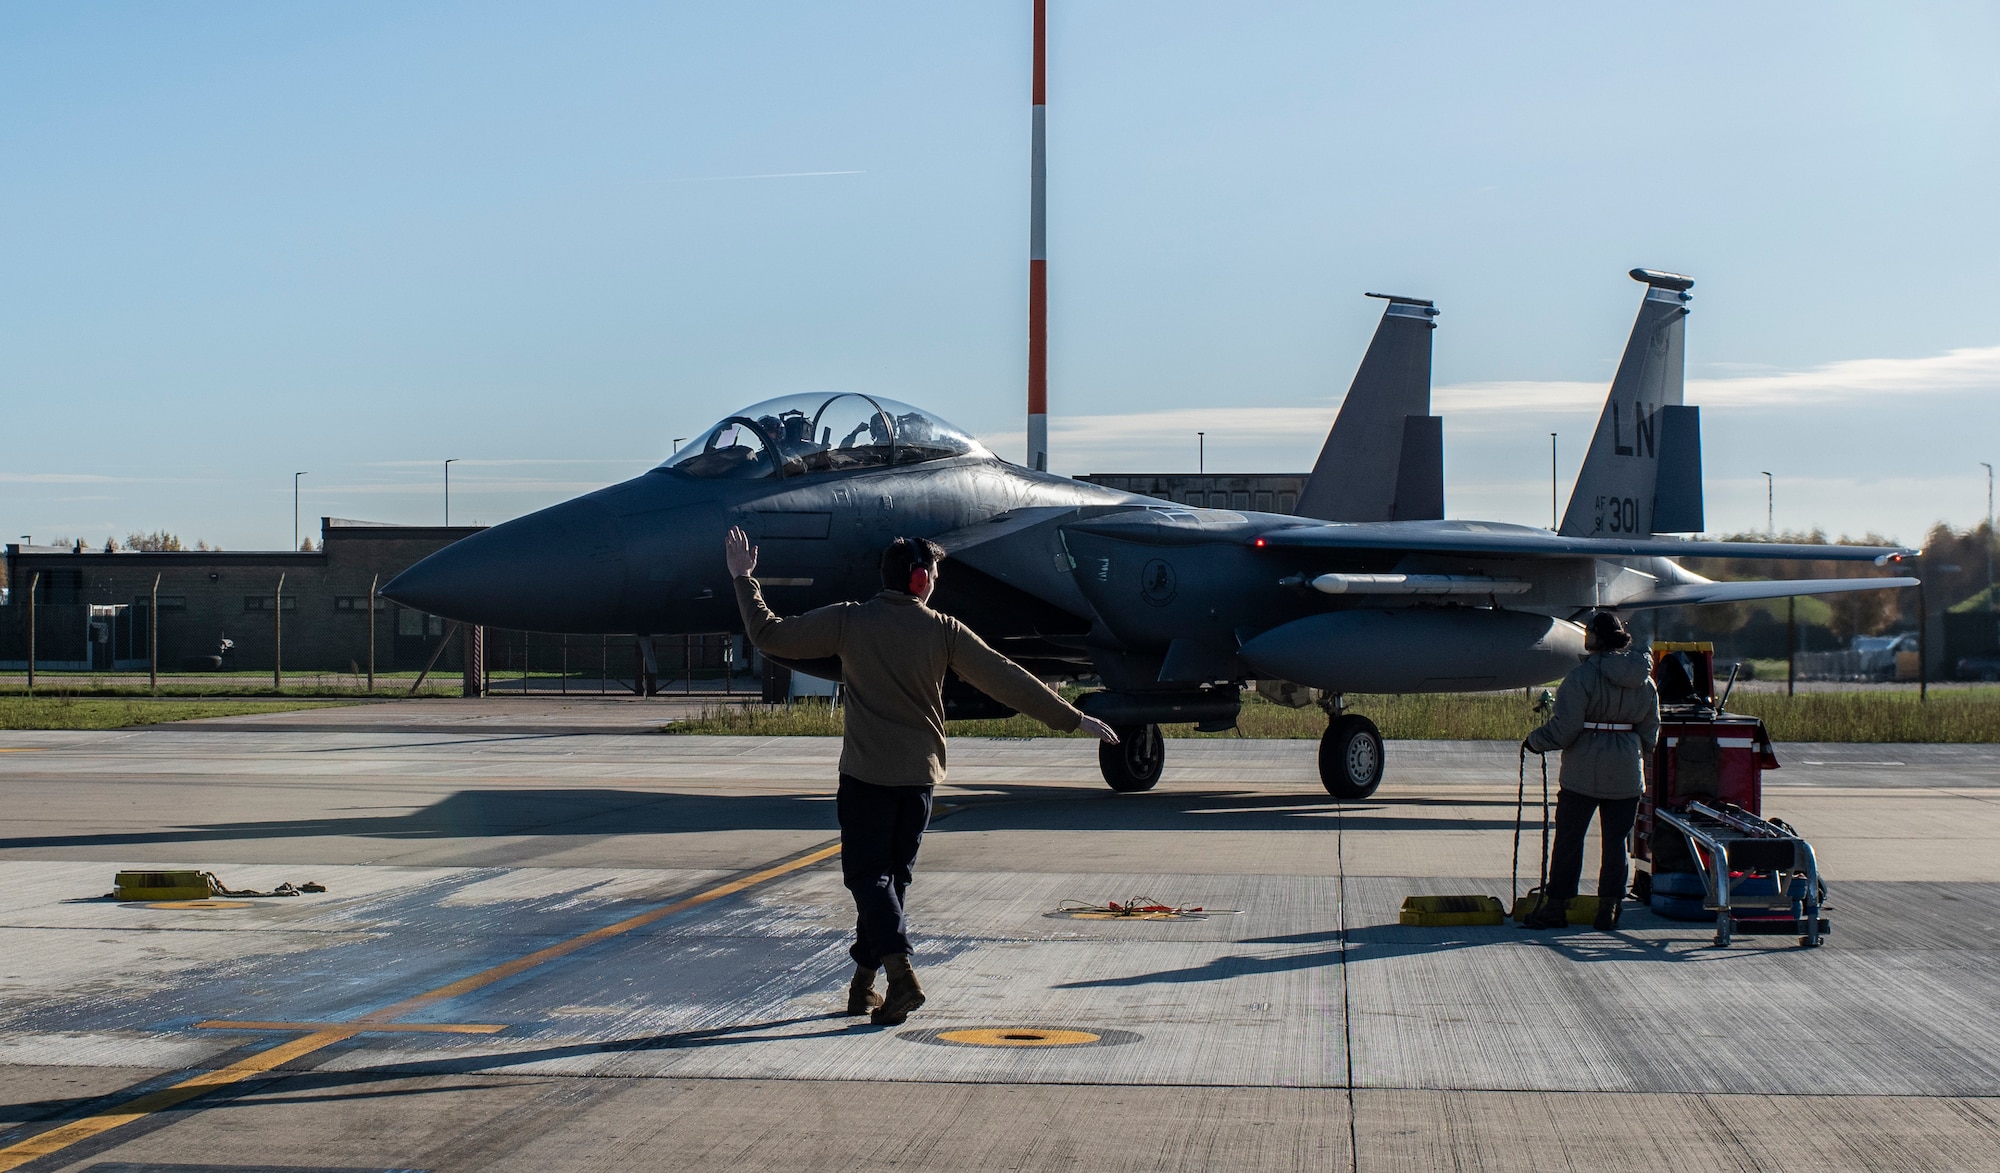 A crew chief assigned to the 48th Aircraft Maintenance Unit marshalls an F-15E Strike Eagle onto the apron after a training sortie in support of exercise Crimson Warrior at Royal Air Force Lakenheath, England, Nov. 6, 2020.  Multi-domain integration exercises like Crimson Warrior strengthen NATO interoperability and test high-end capabilities in a contested, degraded, and operationally limited environment. (U.S. Air Force photo by Airman 1st Class Jessi Monte)